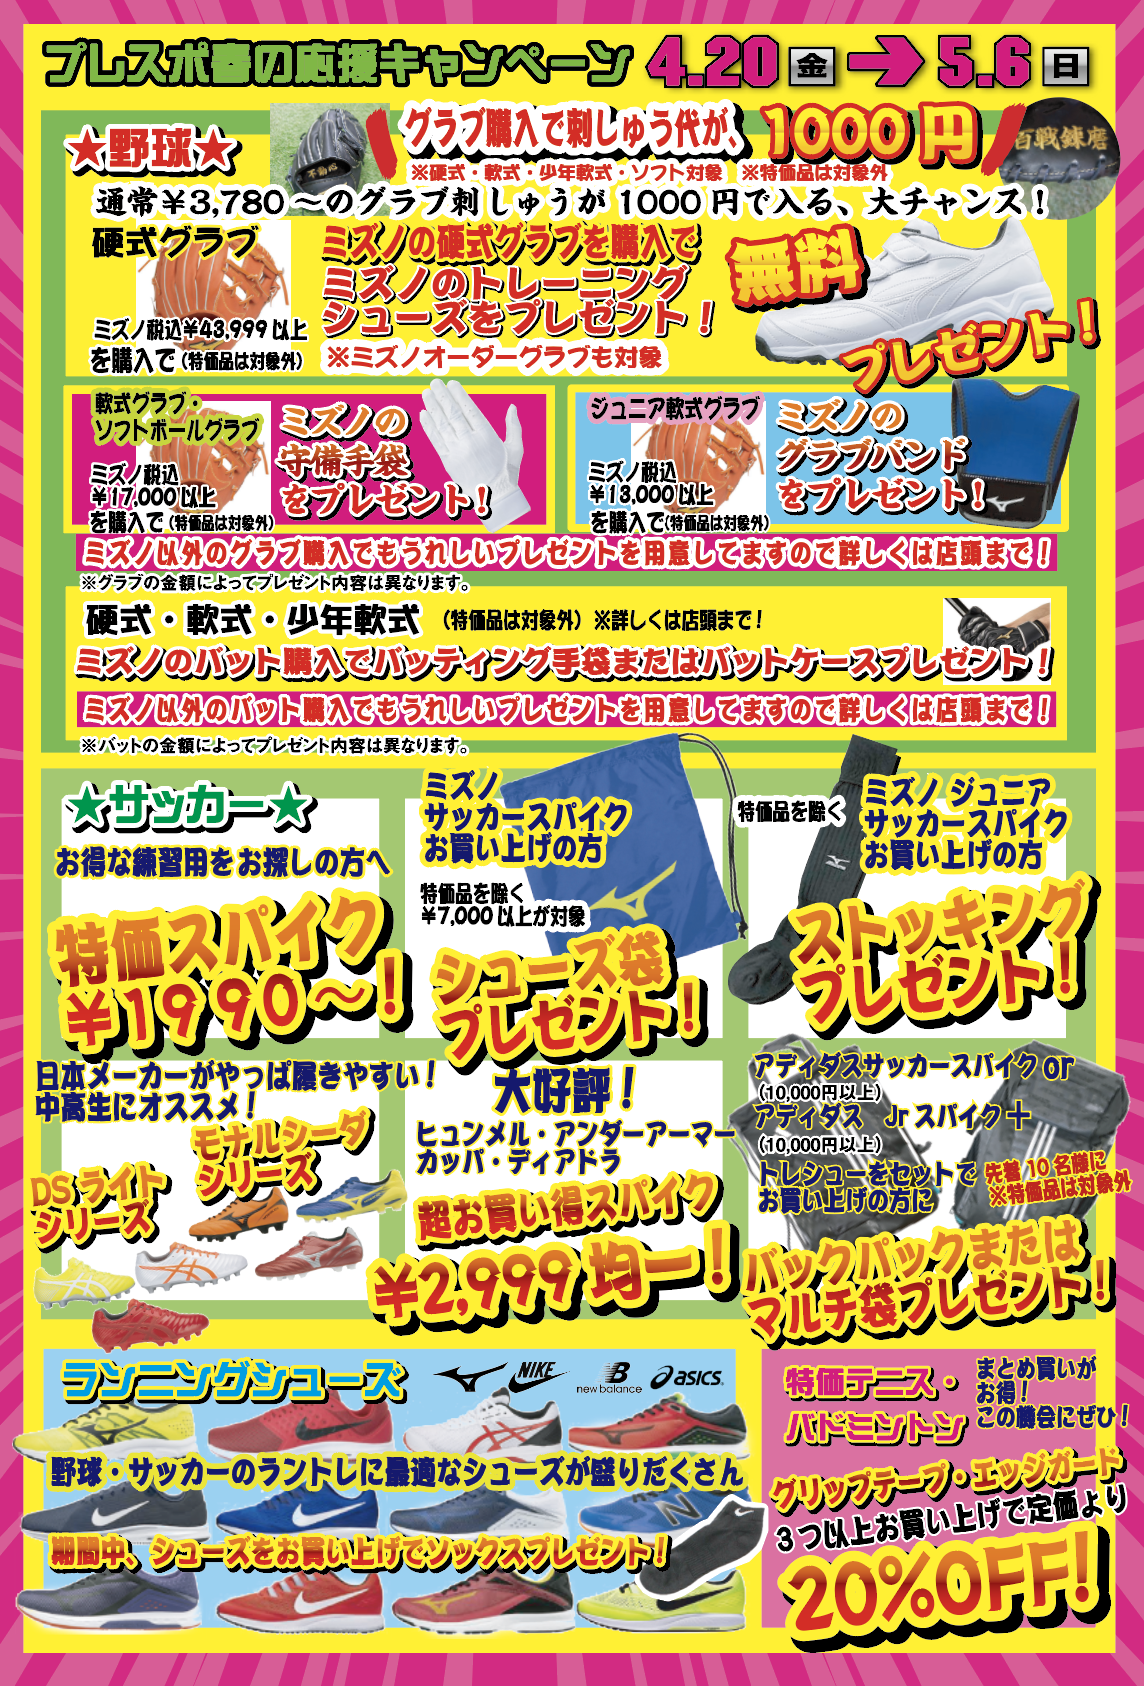 http://www.playsports.jp/news/images/sale2.png